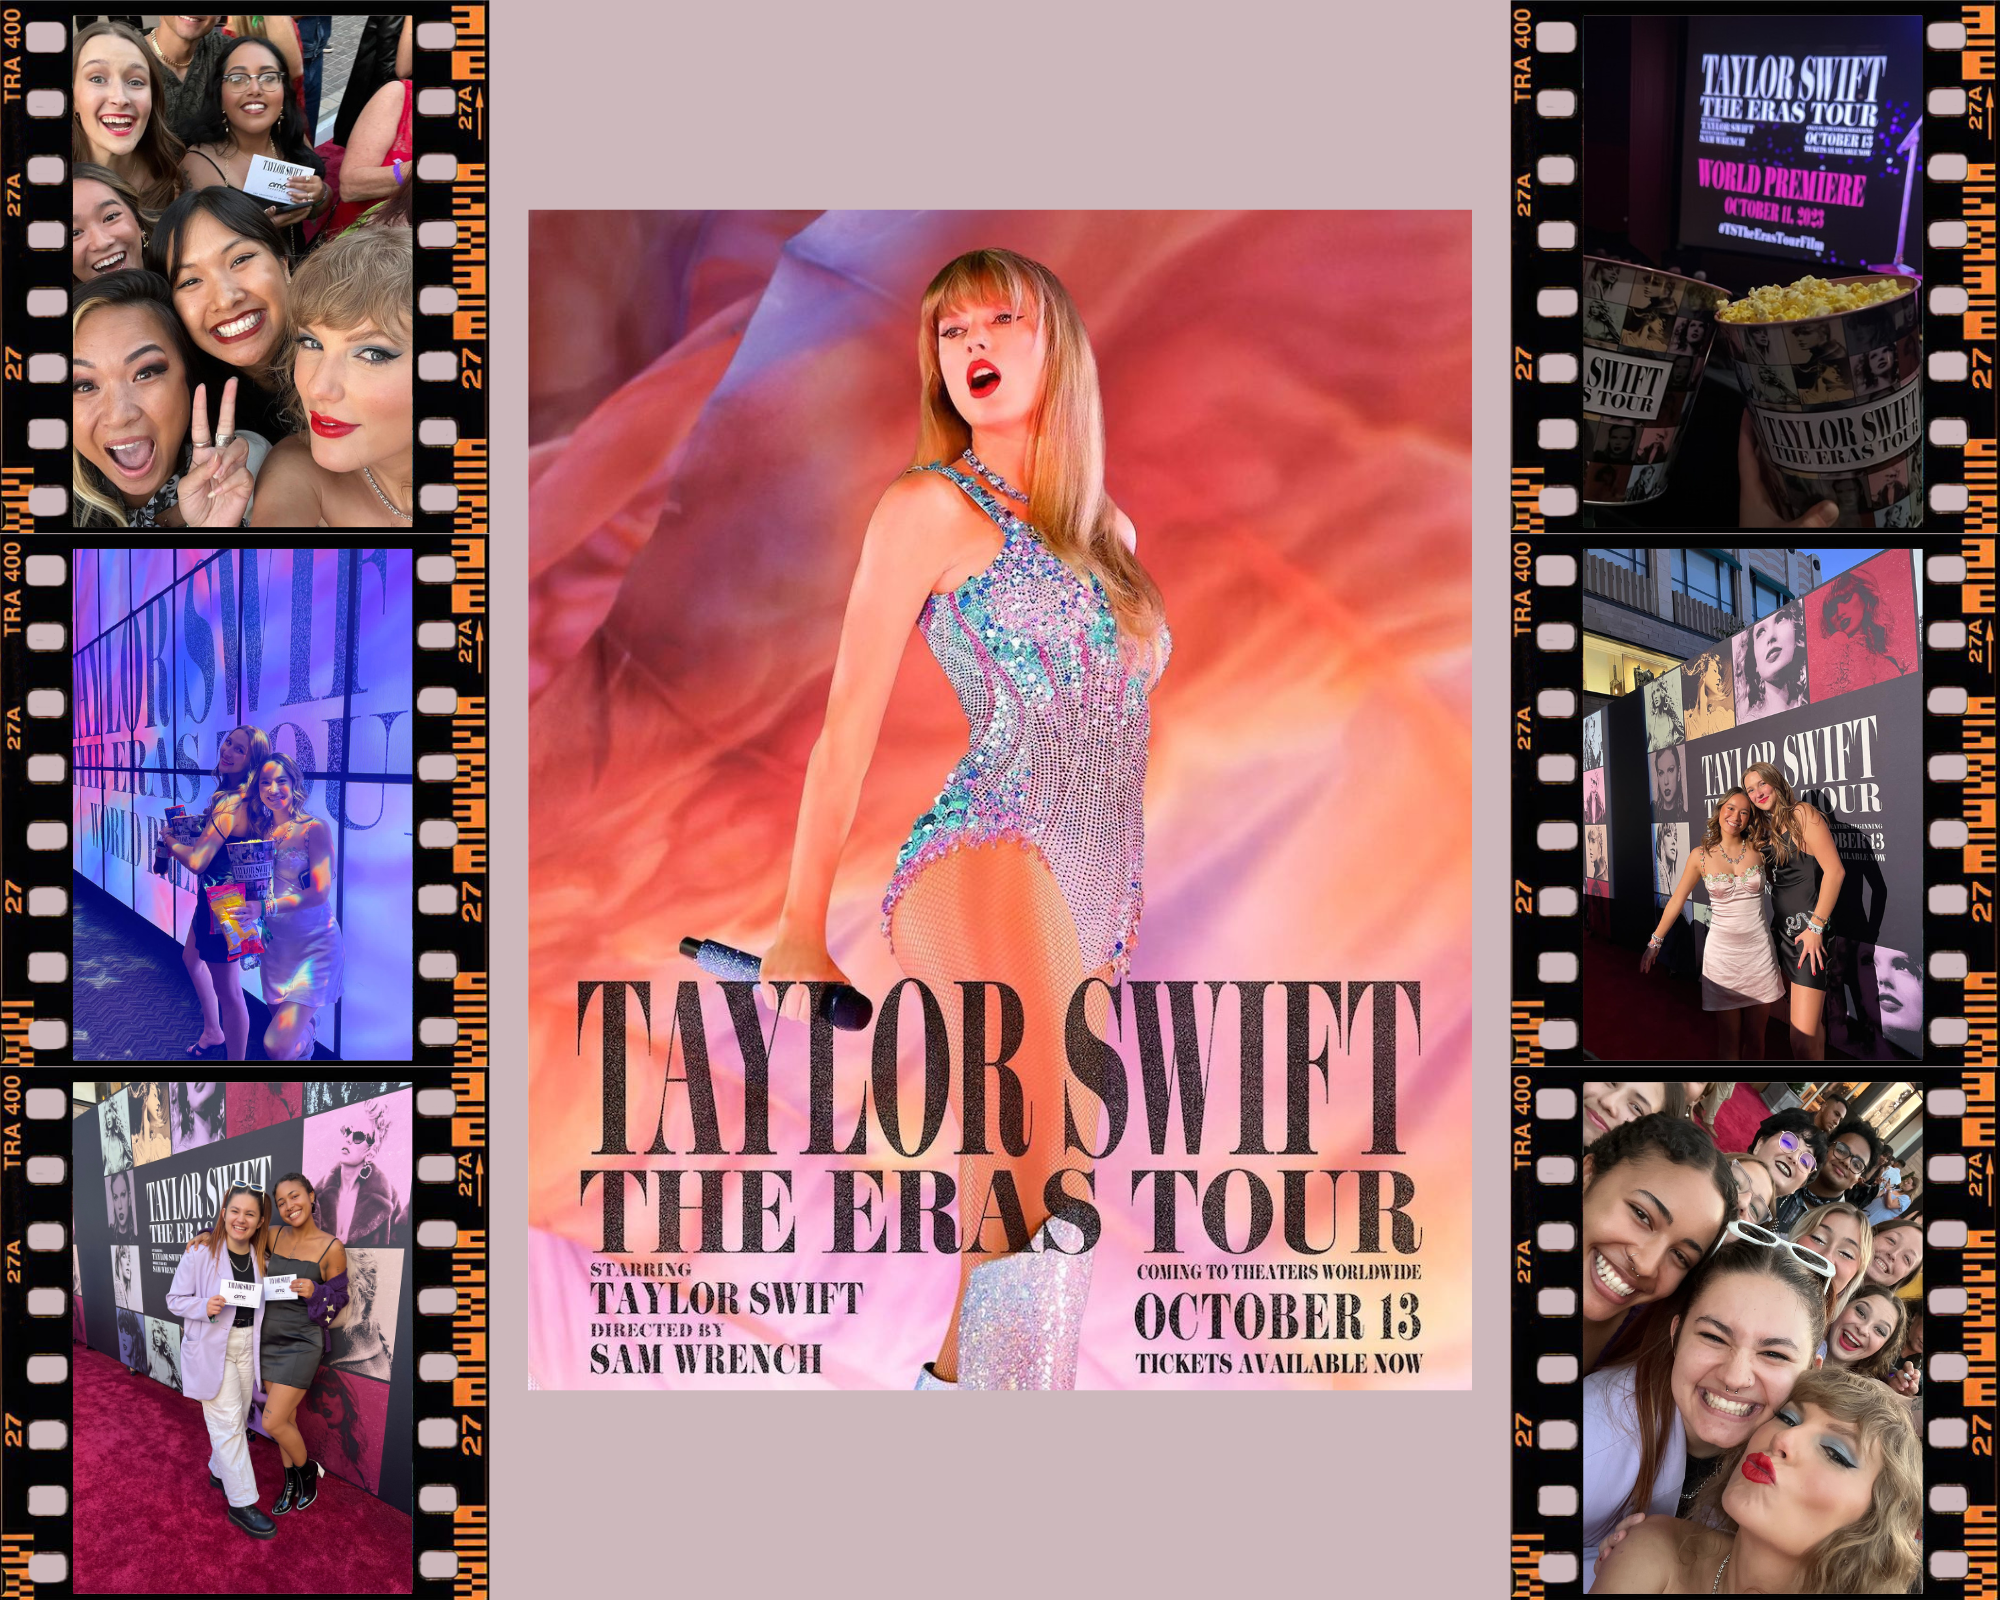 Taylor Swift's 'Eras Tour' movie hits theaters to friendship